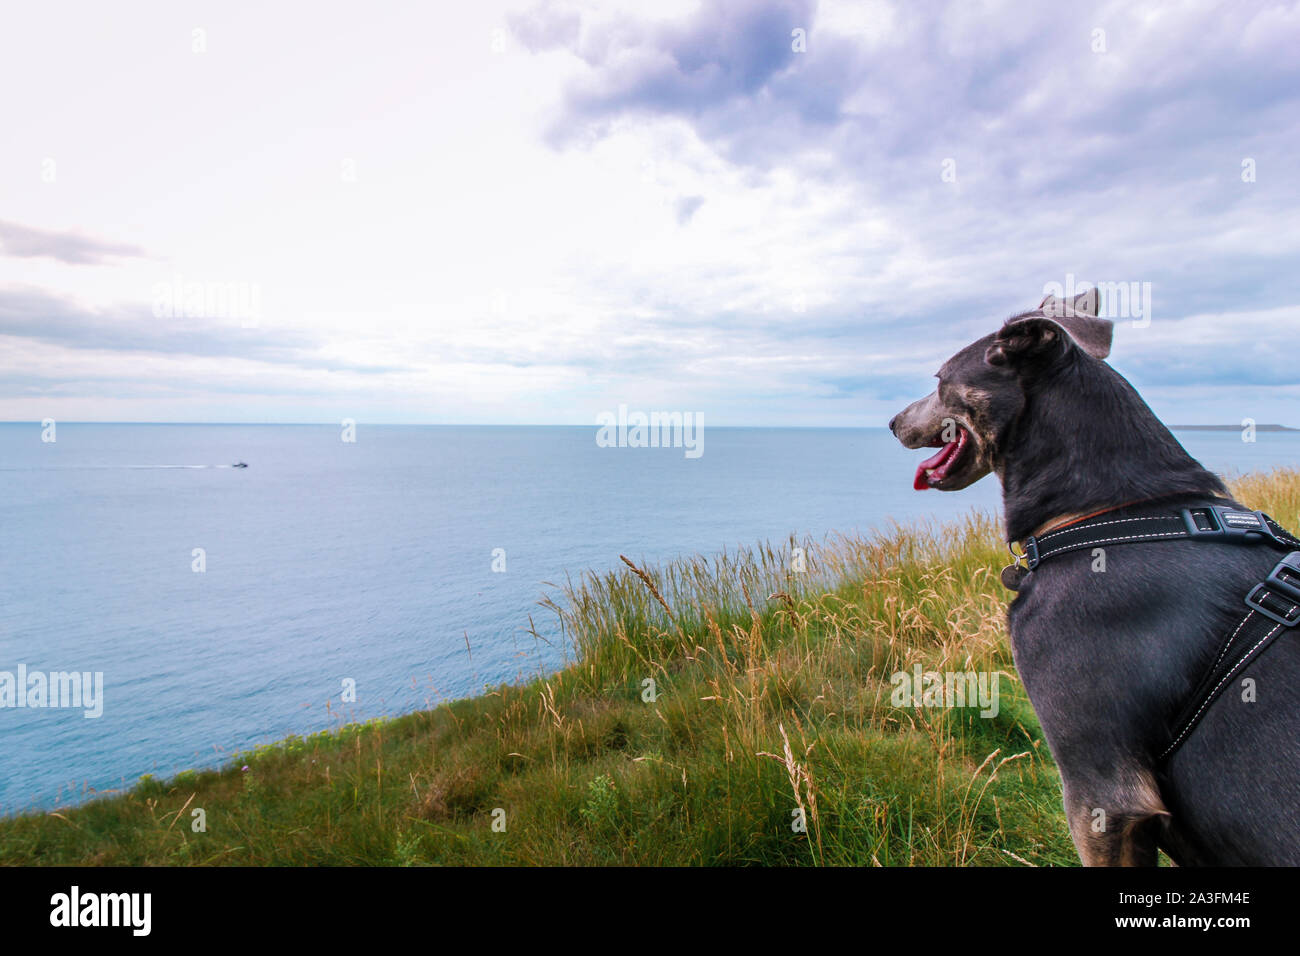 Dog on Cliff Looking out to the Ocean Stock Photo